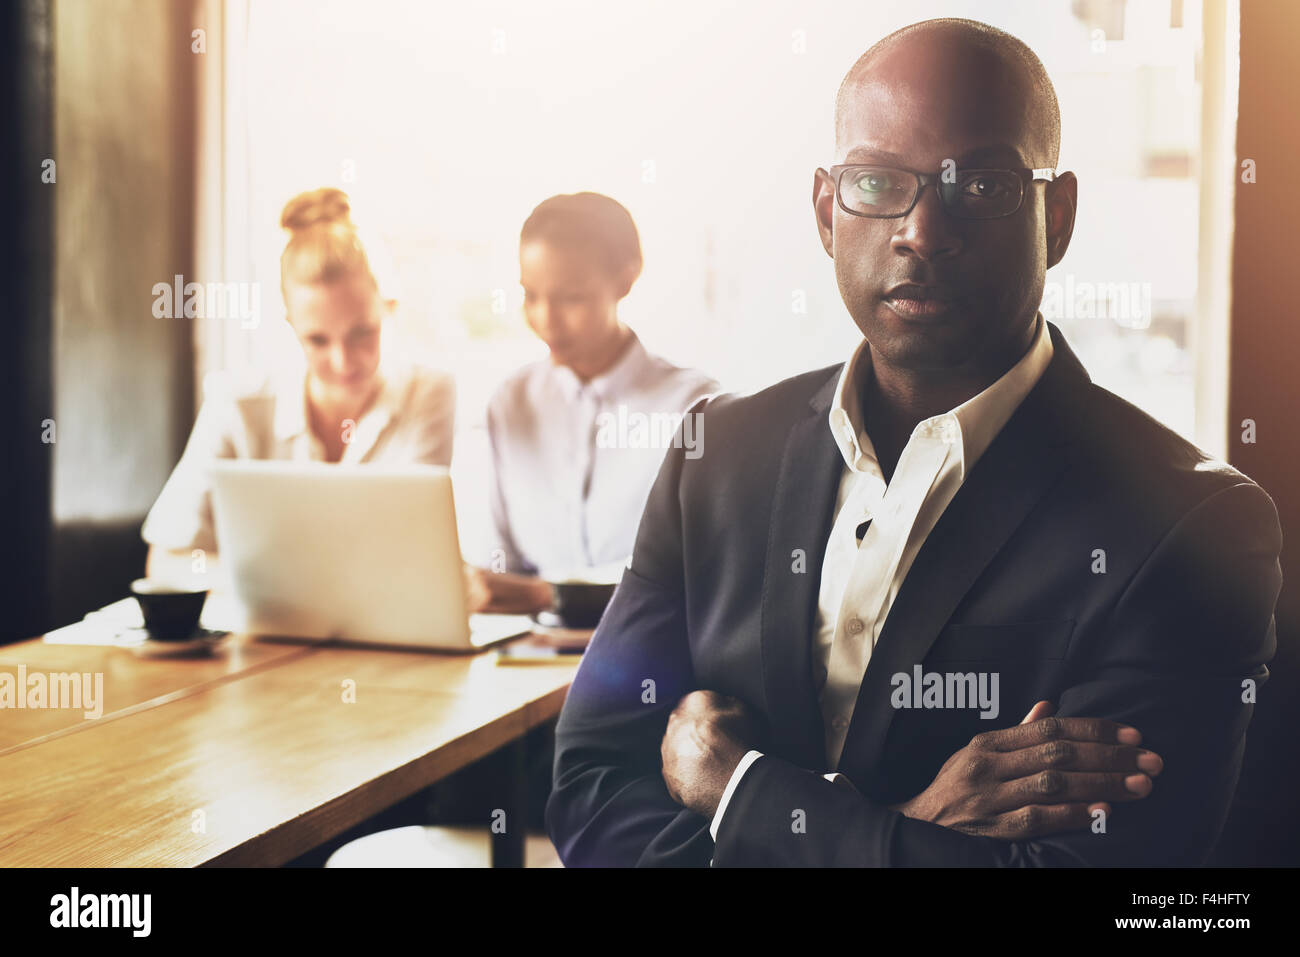 Confident succesful black business man in front of group of people Stock Photo